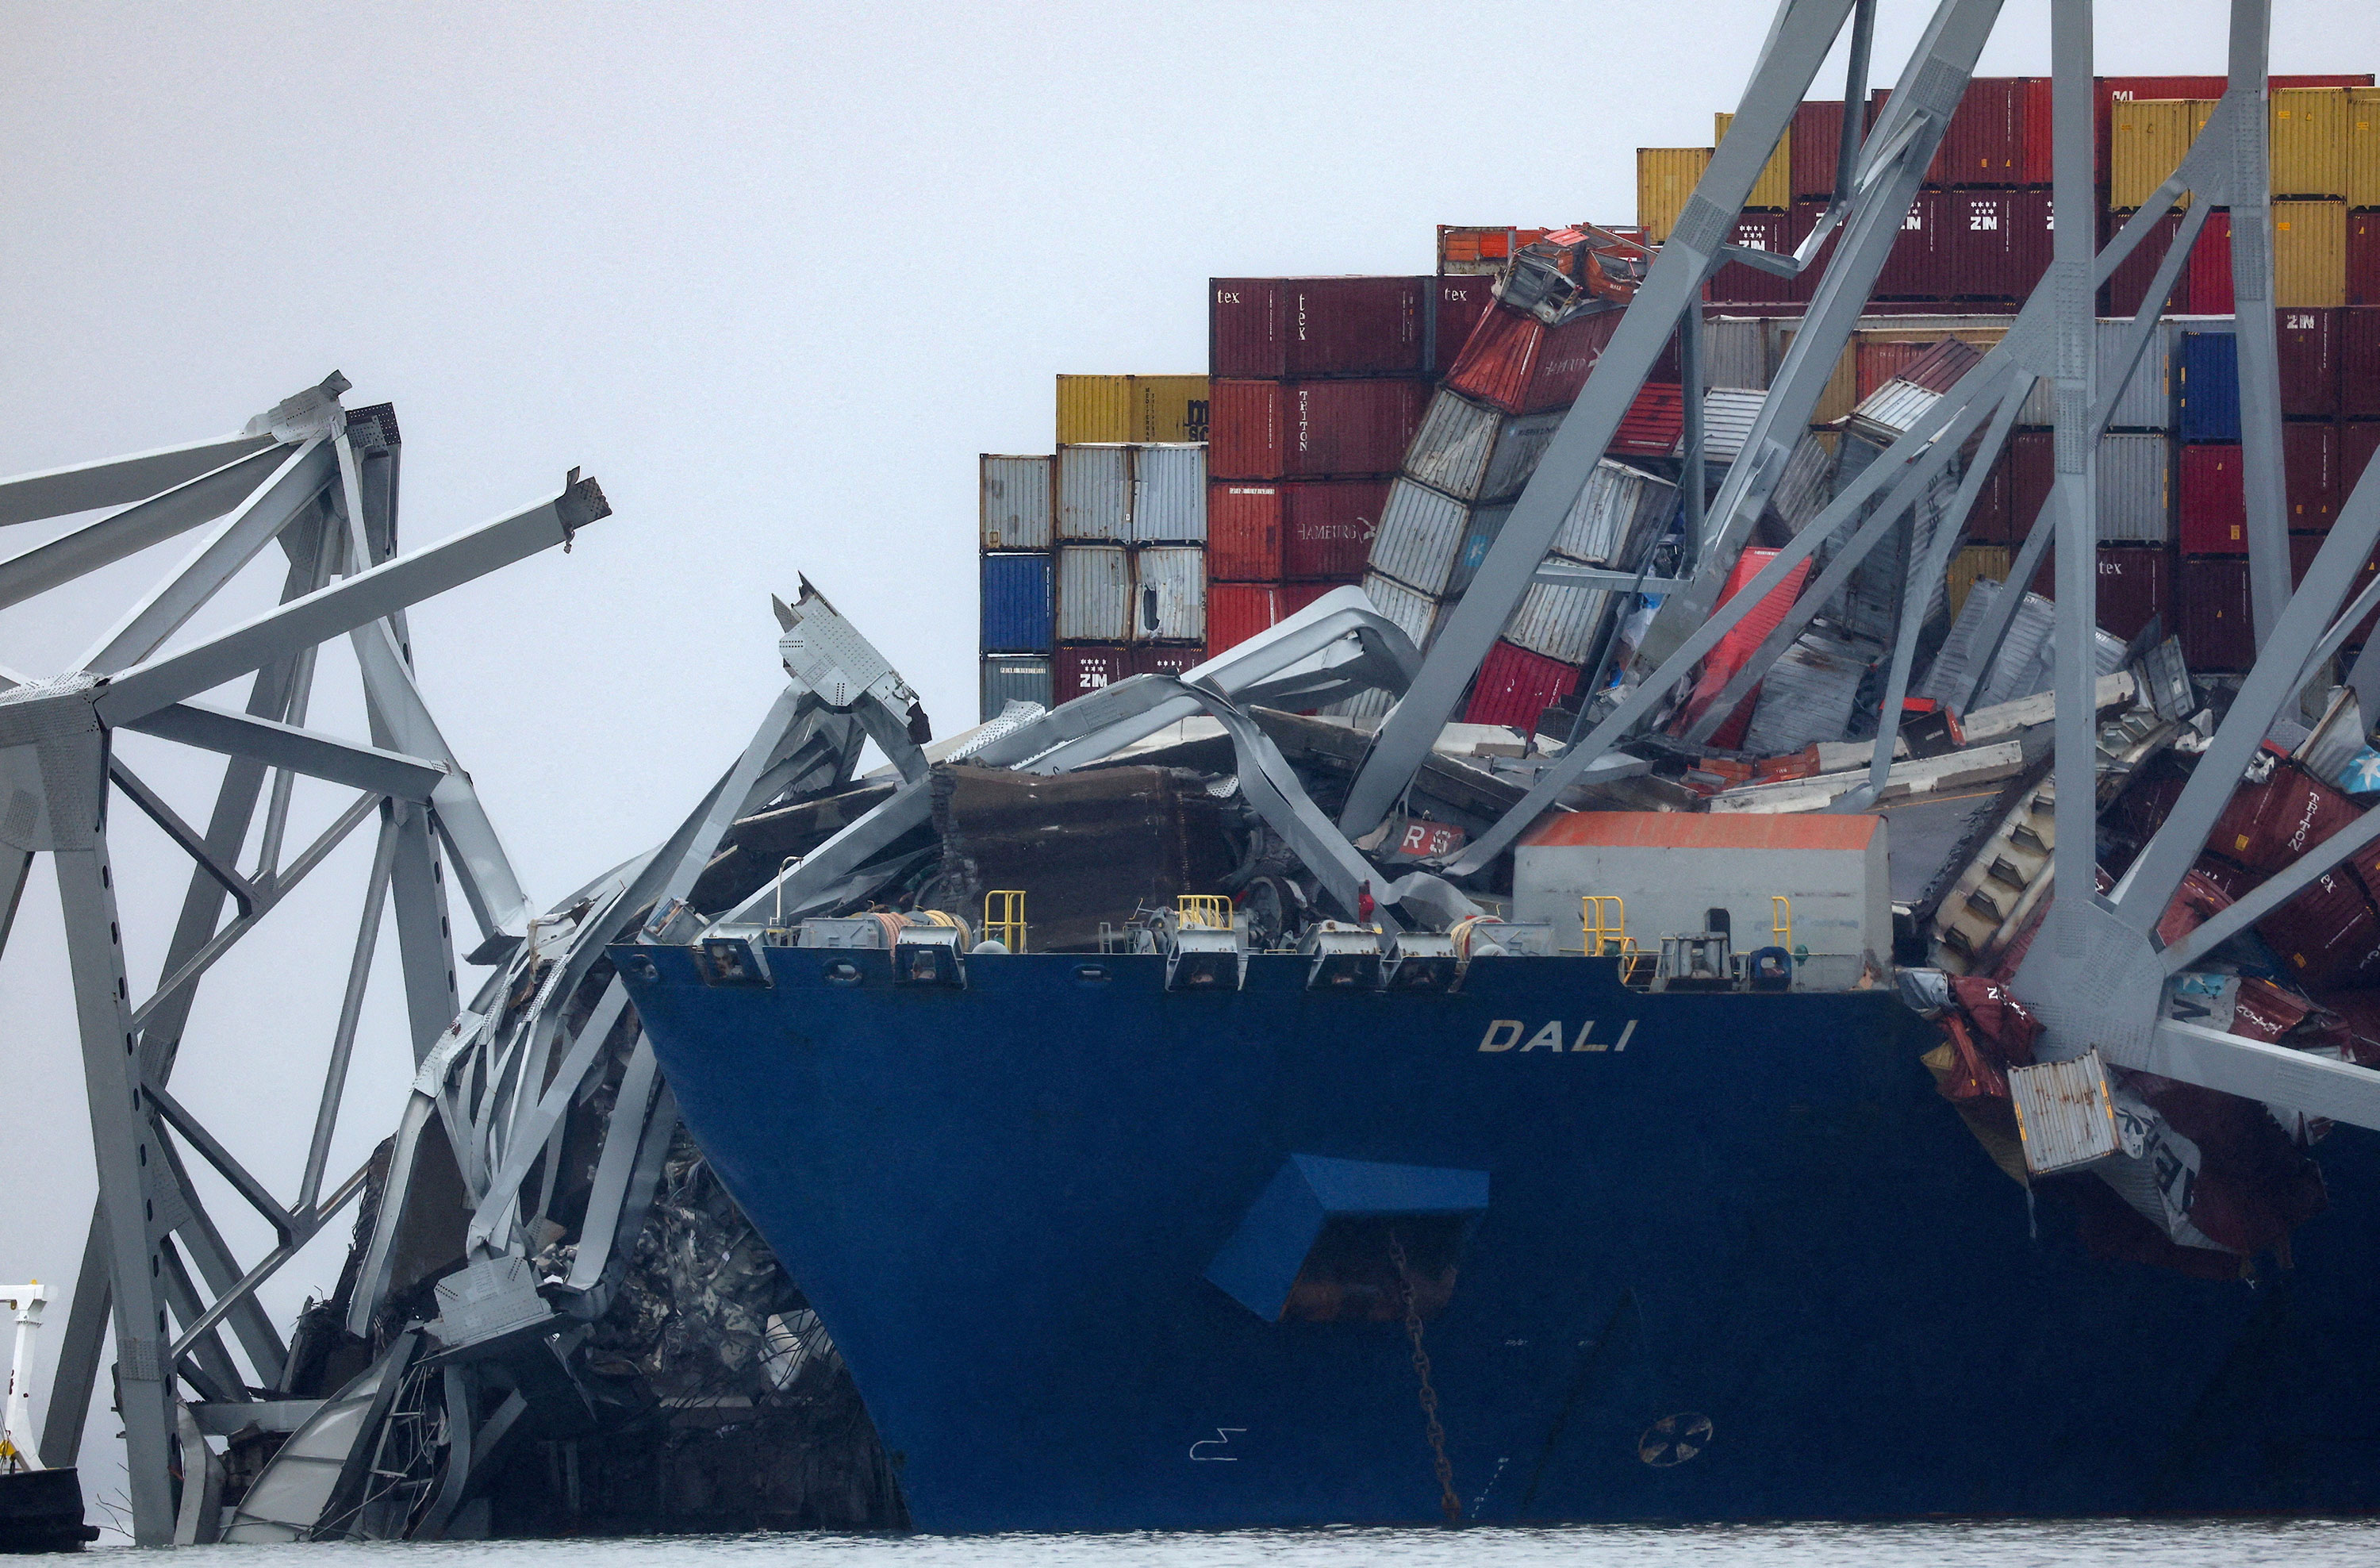 Wreckage lies across the deck of the Dali cargo vessel in Baltimore on Wednesday. 